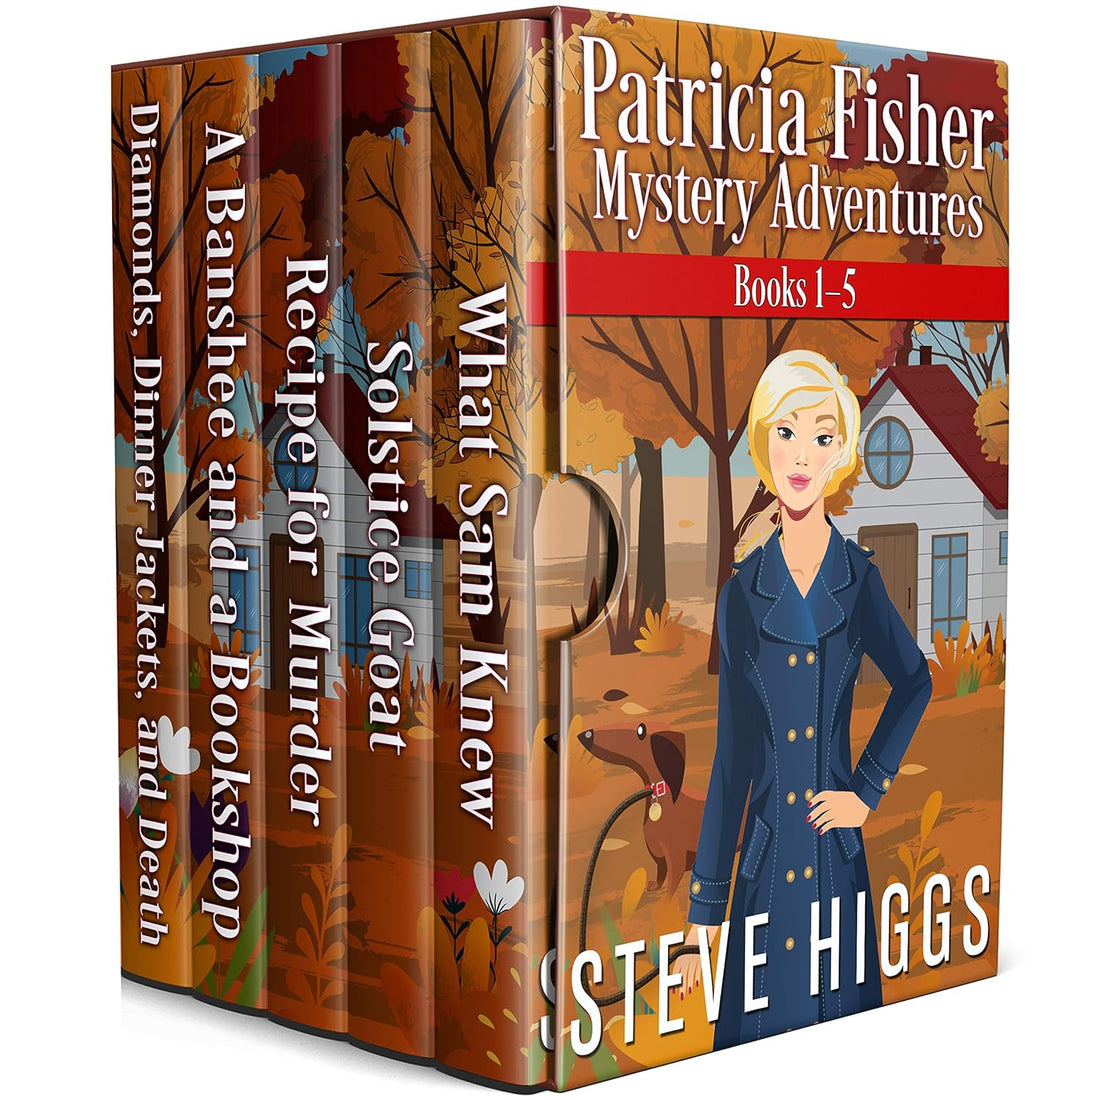 Diamonds, Dinner Jackets and Death : Patricia Fisher Mystery Adventures Book 5